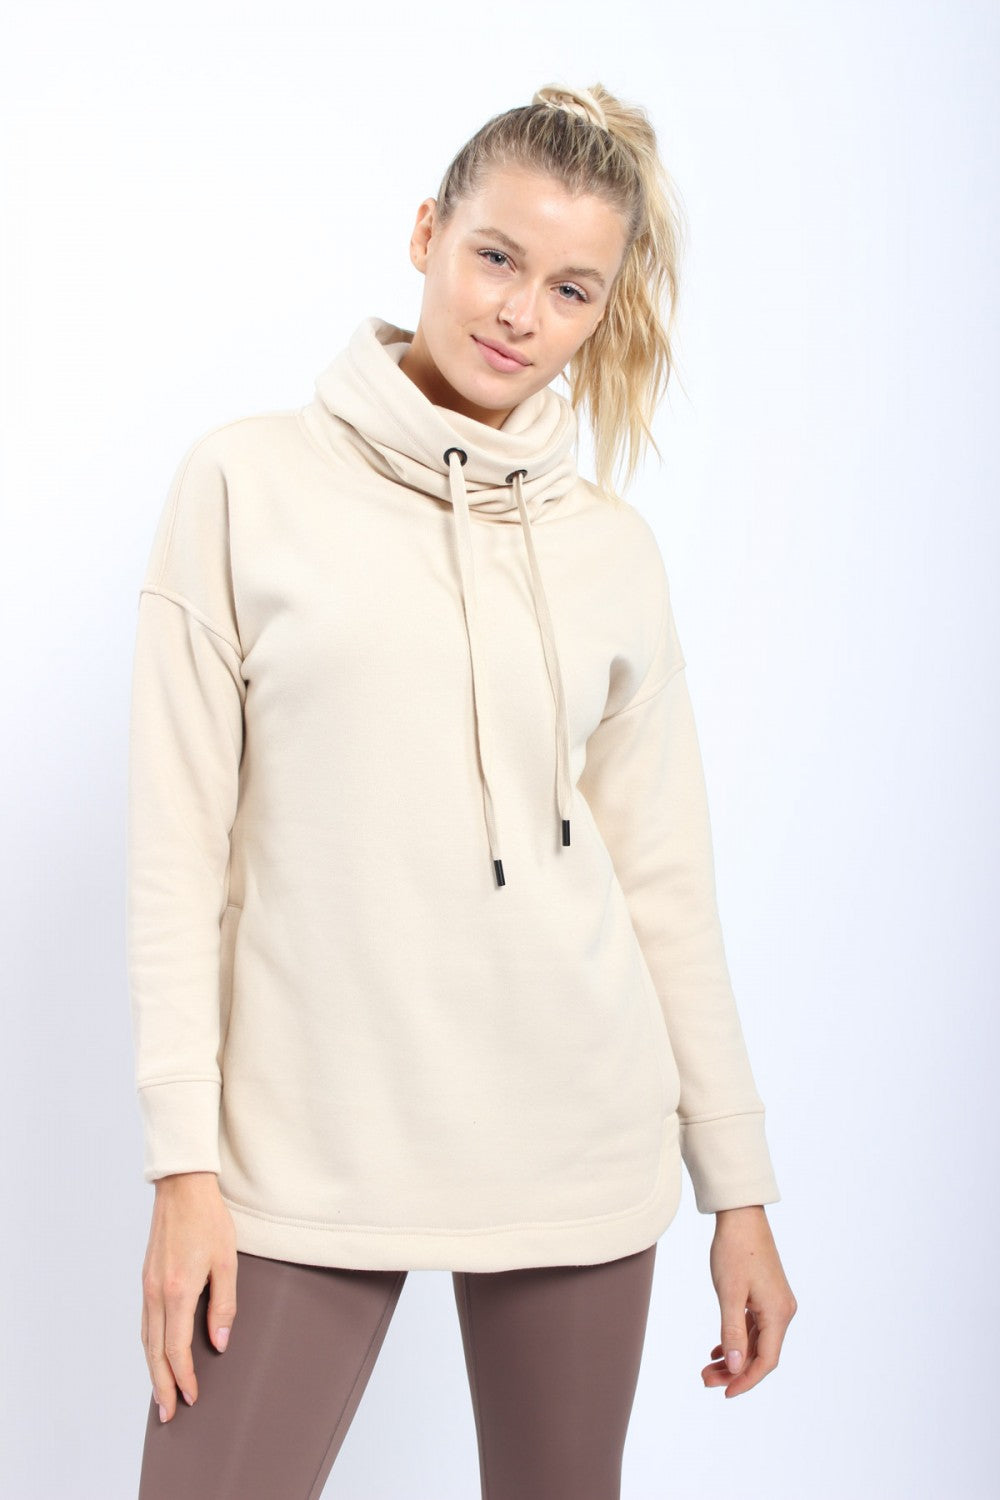 High Neck Pullover with Curved Hem